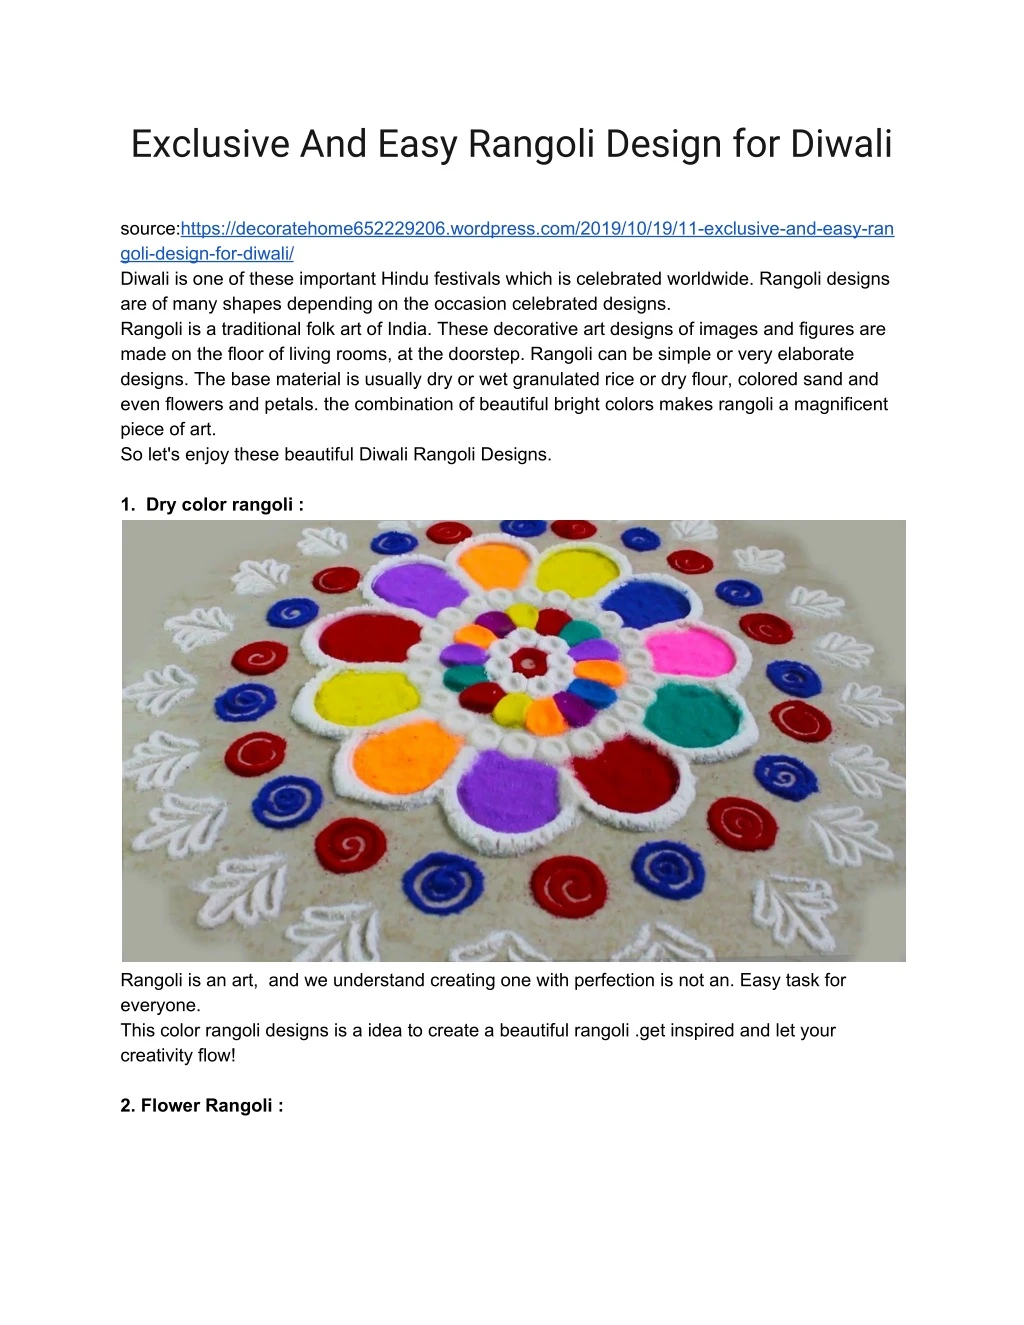 exclusive and easy rangoli design for diwali